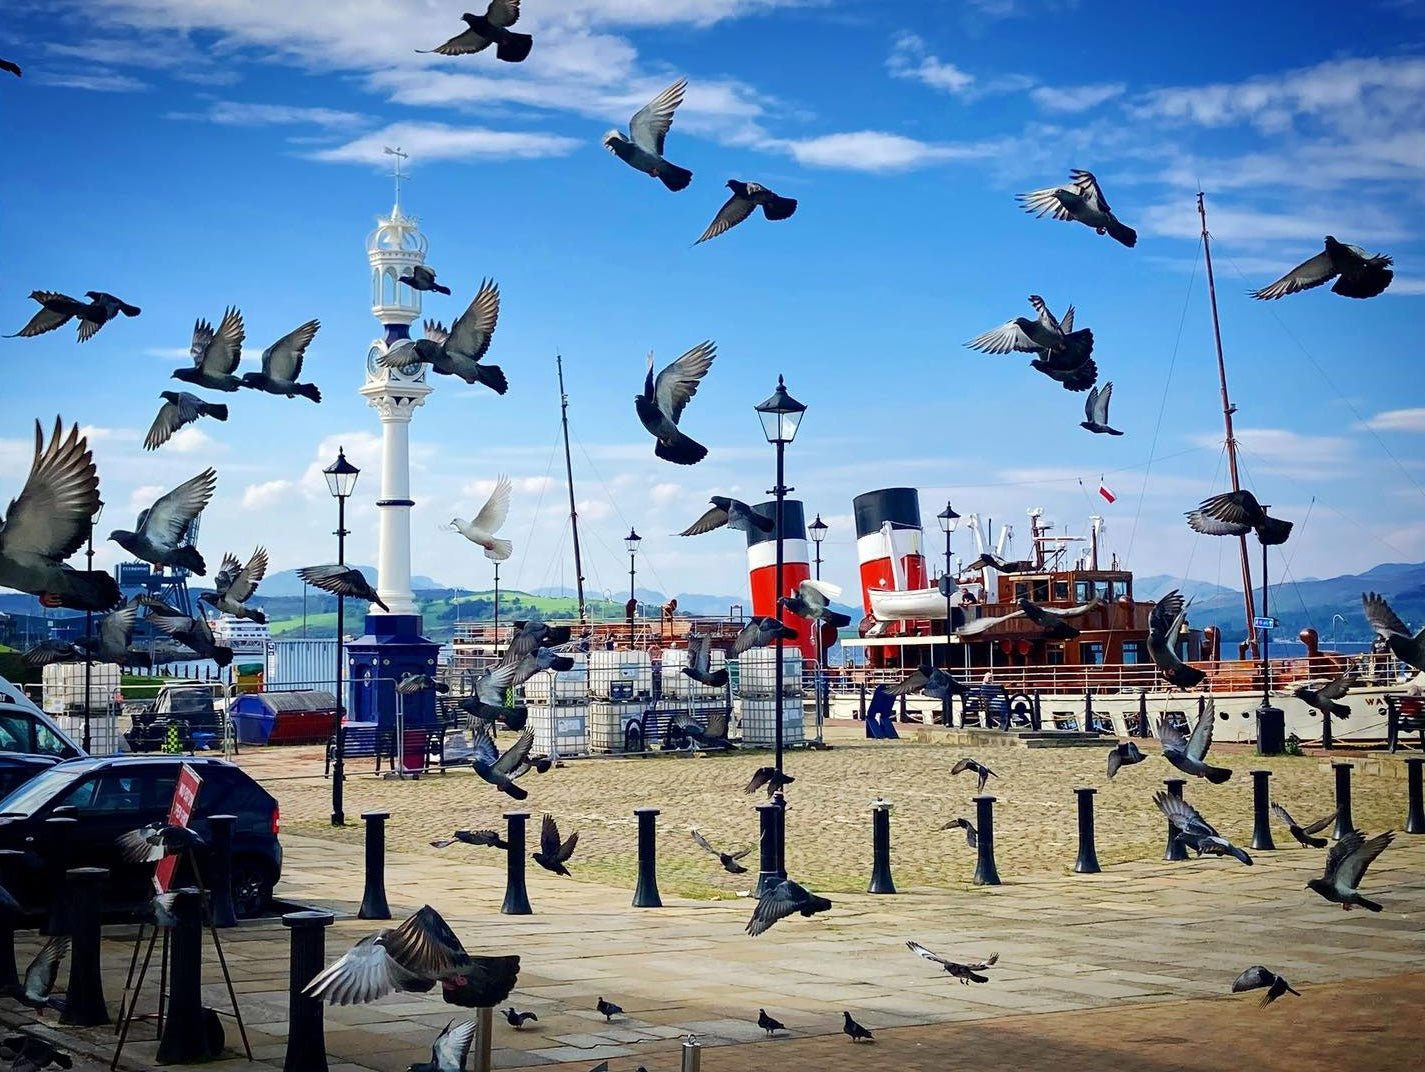 Custom House Pigeons Scottish Landscape Photography-Scottish Landscape Photography-River Clyde Art Gallery-Paintings, Prints, Homeware, Art Gifts From Scotland By Scottish Artist Kevin Hunter